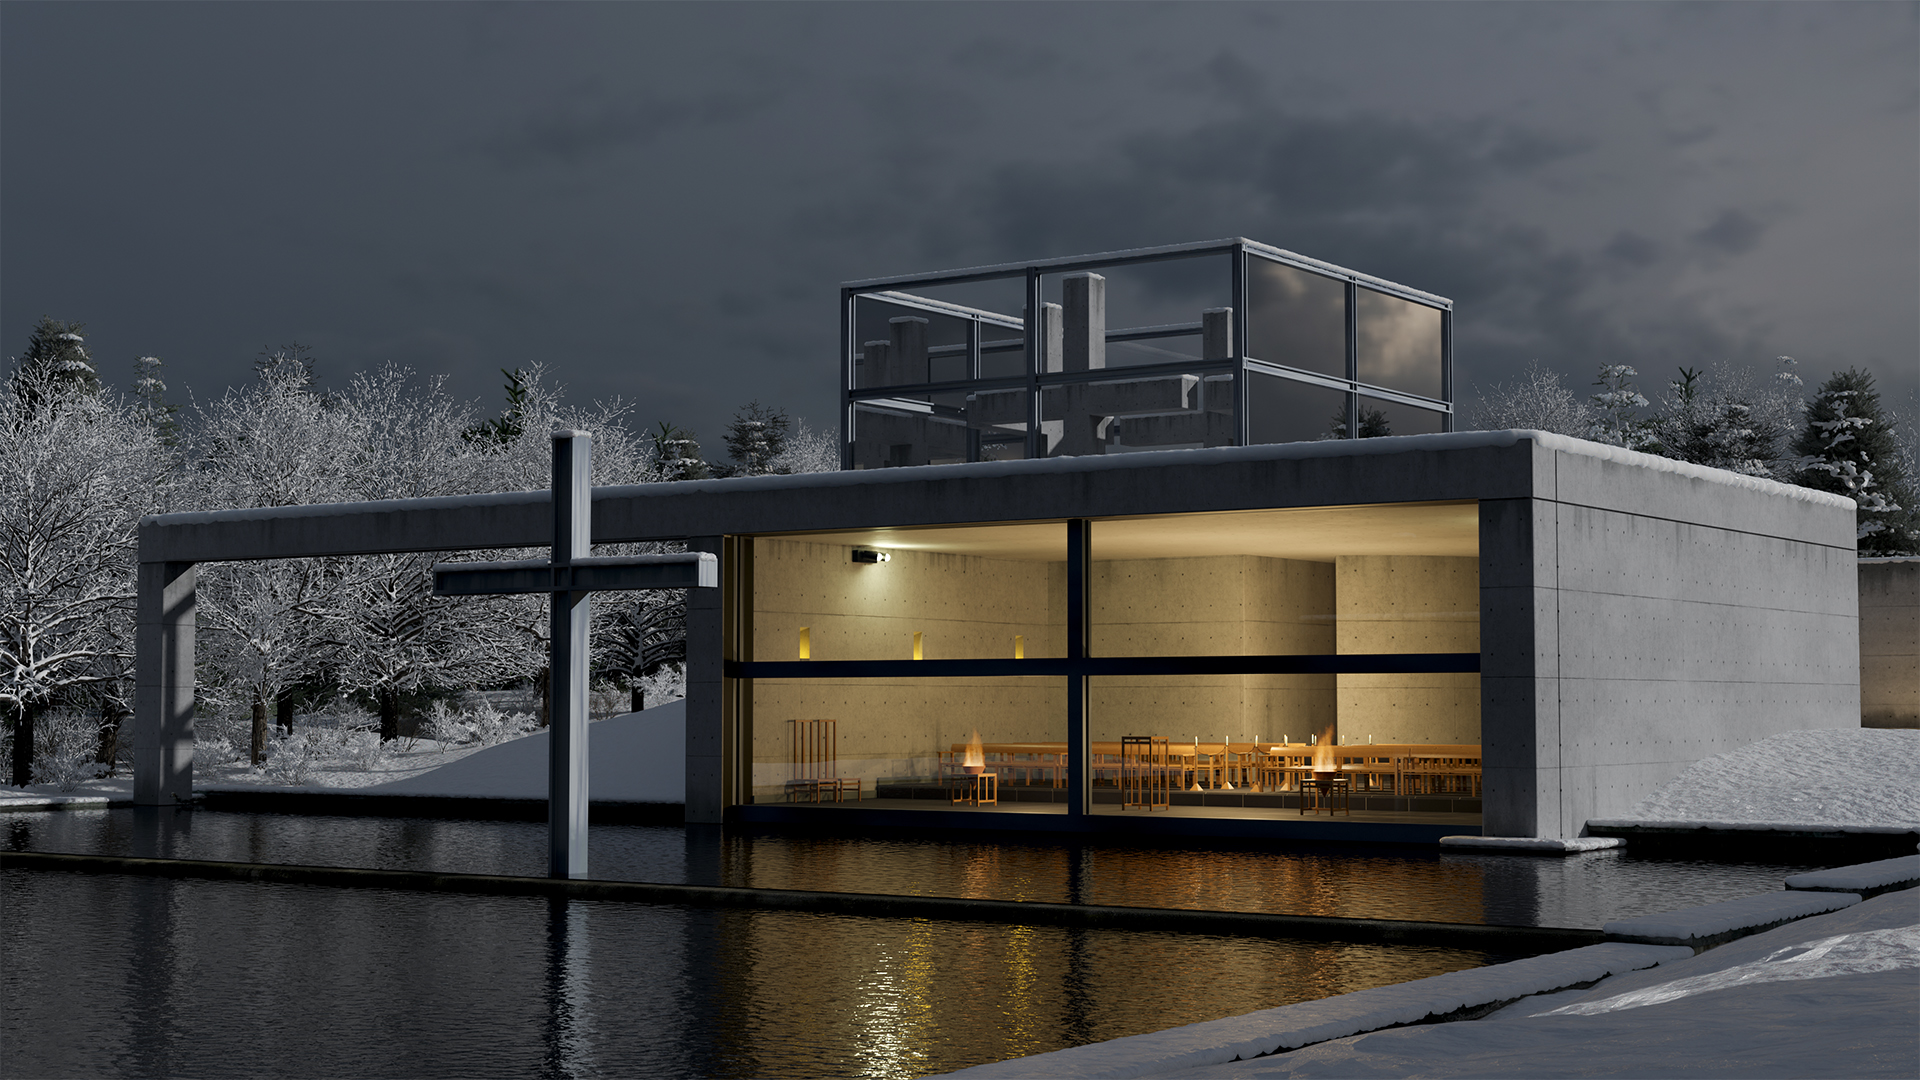 CHURCH ON THE WATER (portfolio project inspired by the architect TADAO  ANDO) - Finished Projects - Blender Artists Community